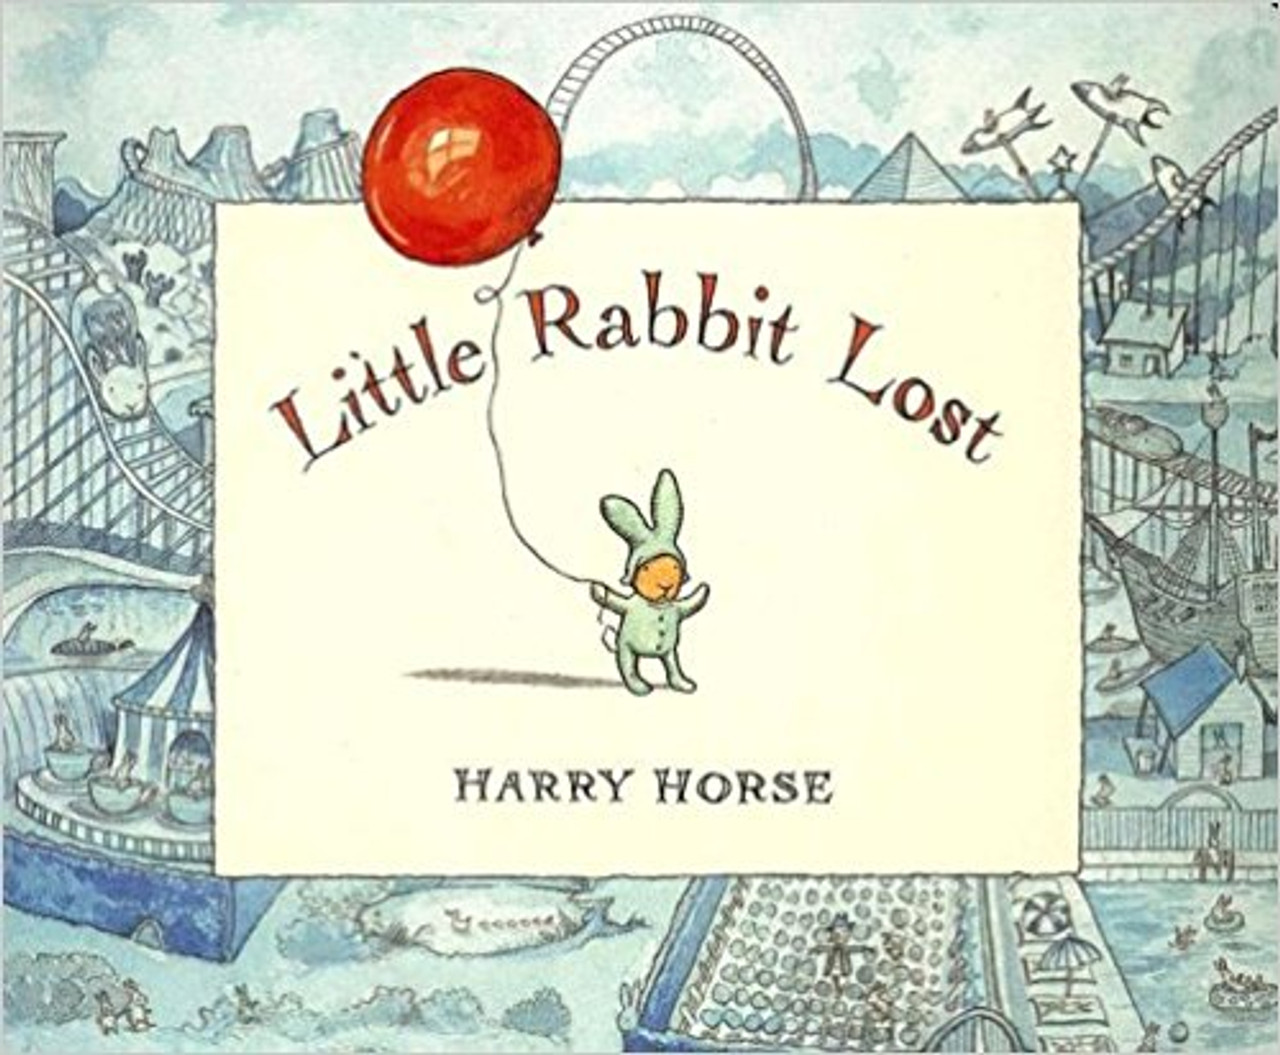 On his birthday Little Rabbit thinks that he is now a big rabbit, until he gets lost at the Rabbit World amusement park.